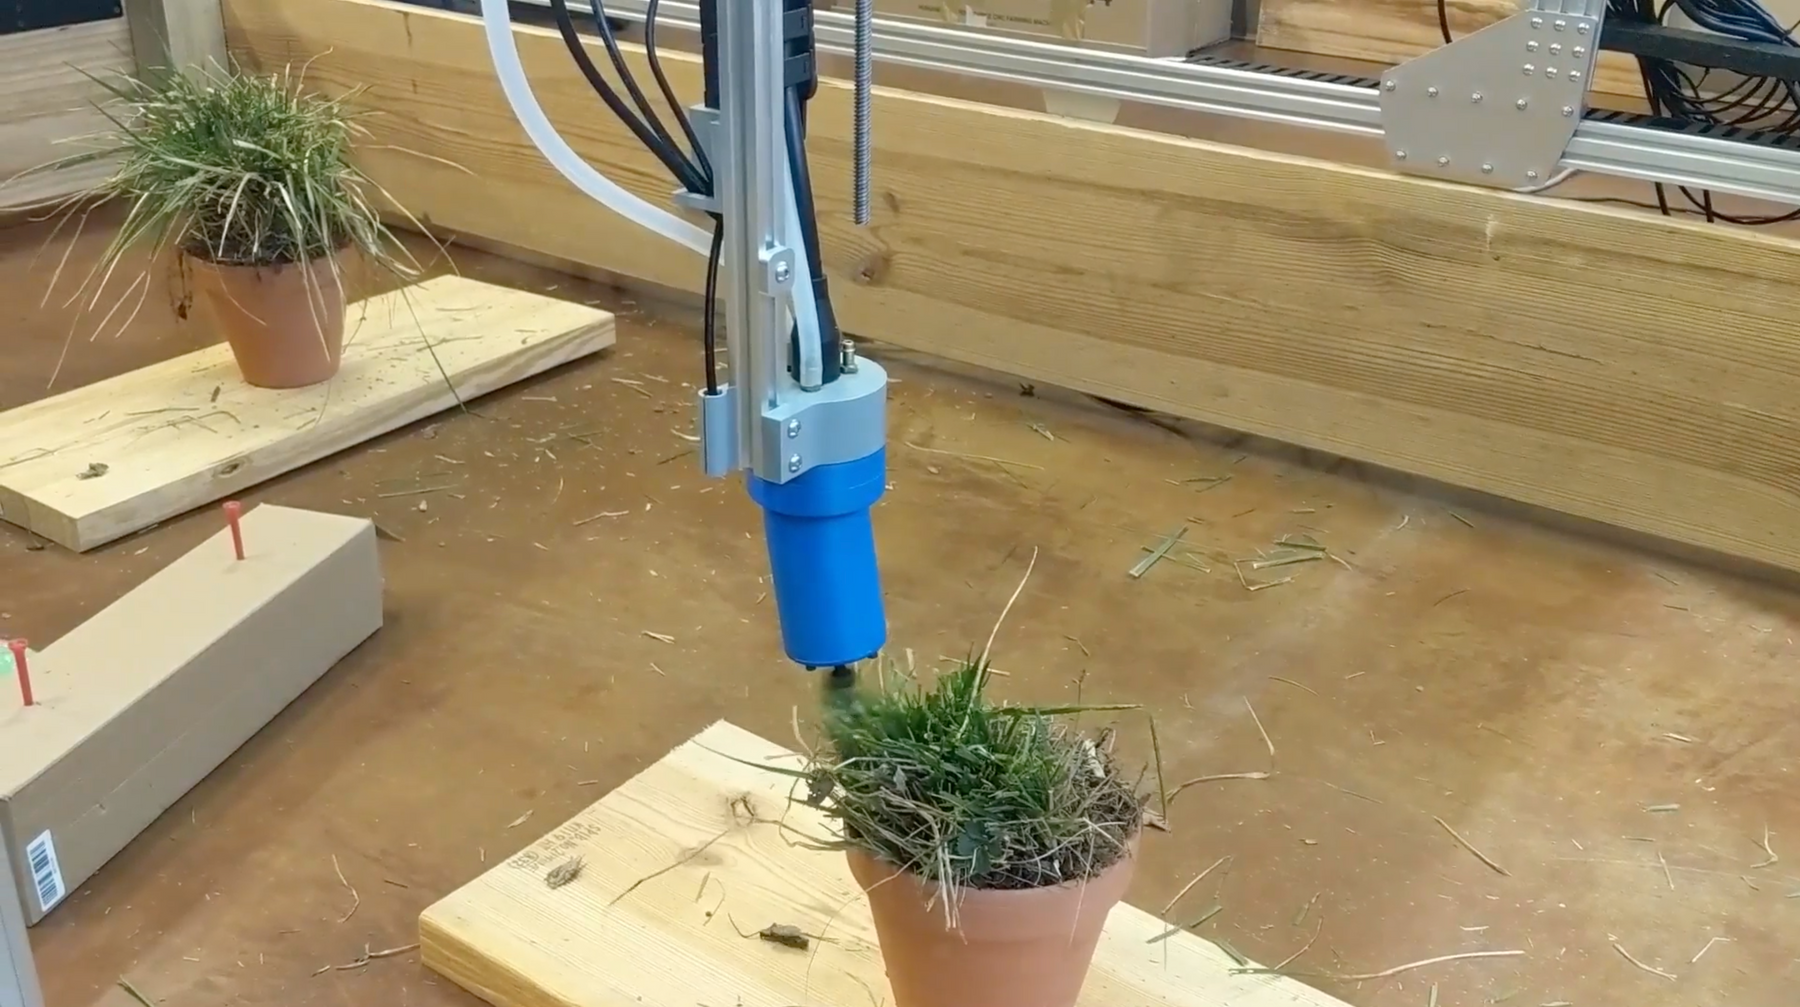 Weed Trimmer Tool Developed by the Liberty University School of Engineering